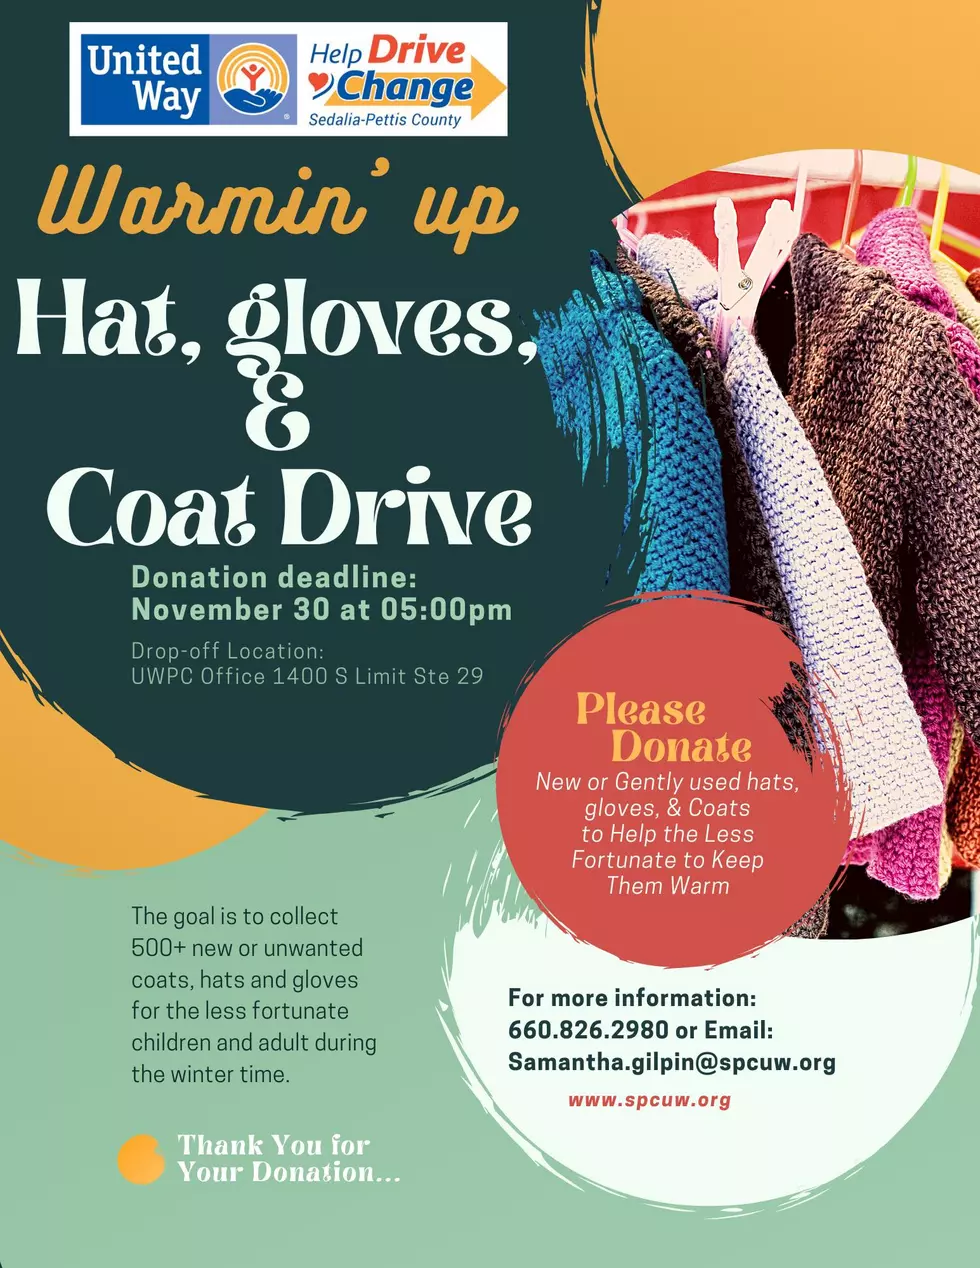 United Way of Pettis County Wants to Help ‘Warm Up’ Those in Need